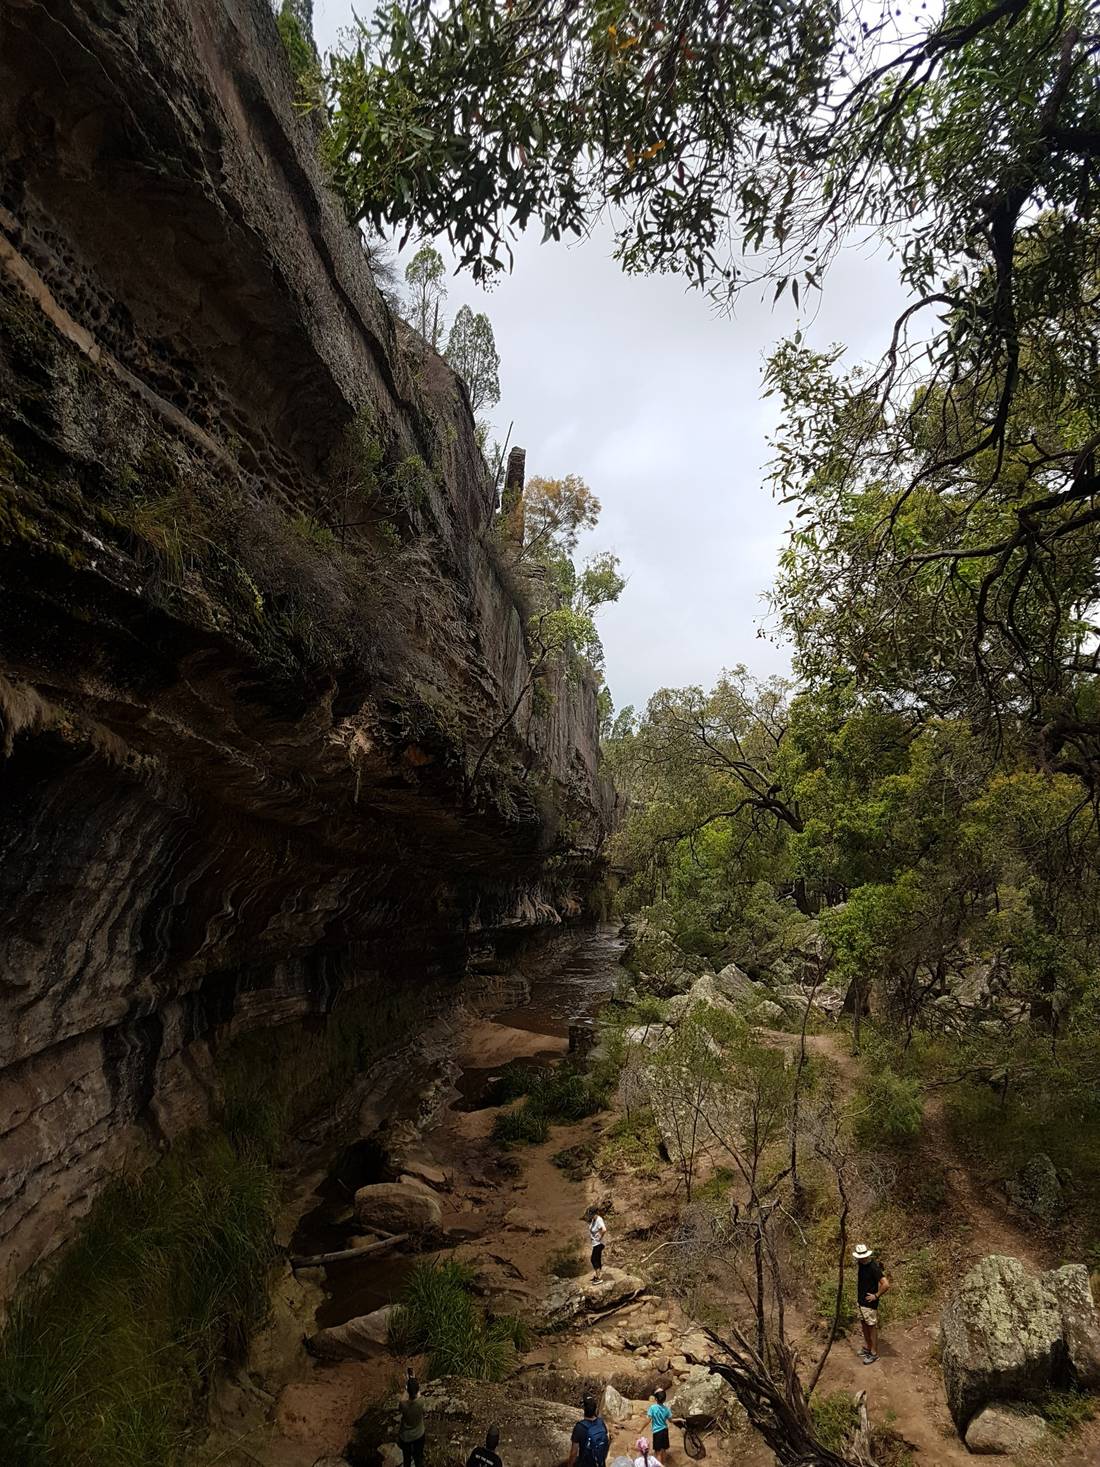 We did not see many people along the track but there was quite a few exploring the Drip Gorge area.